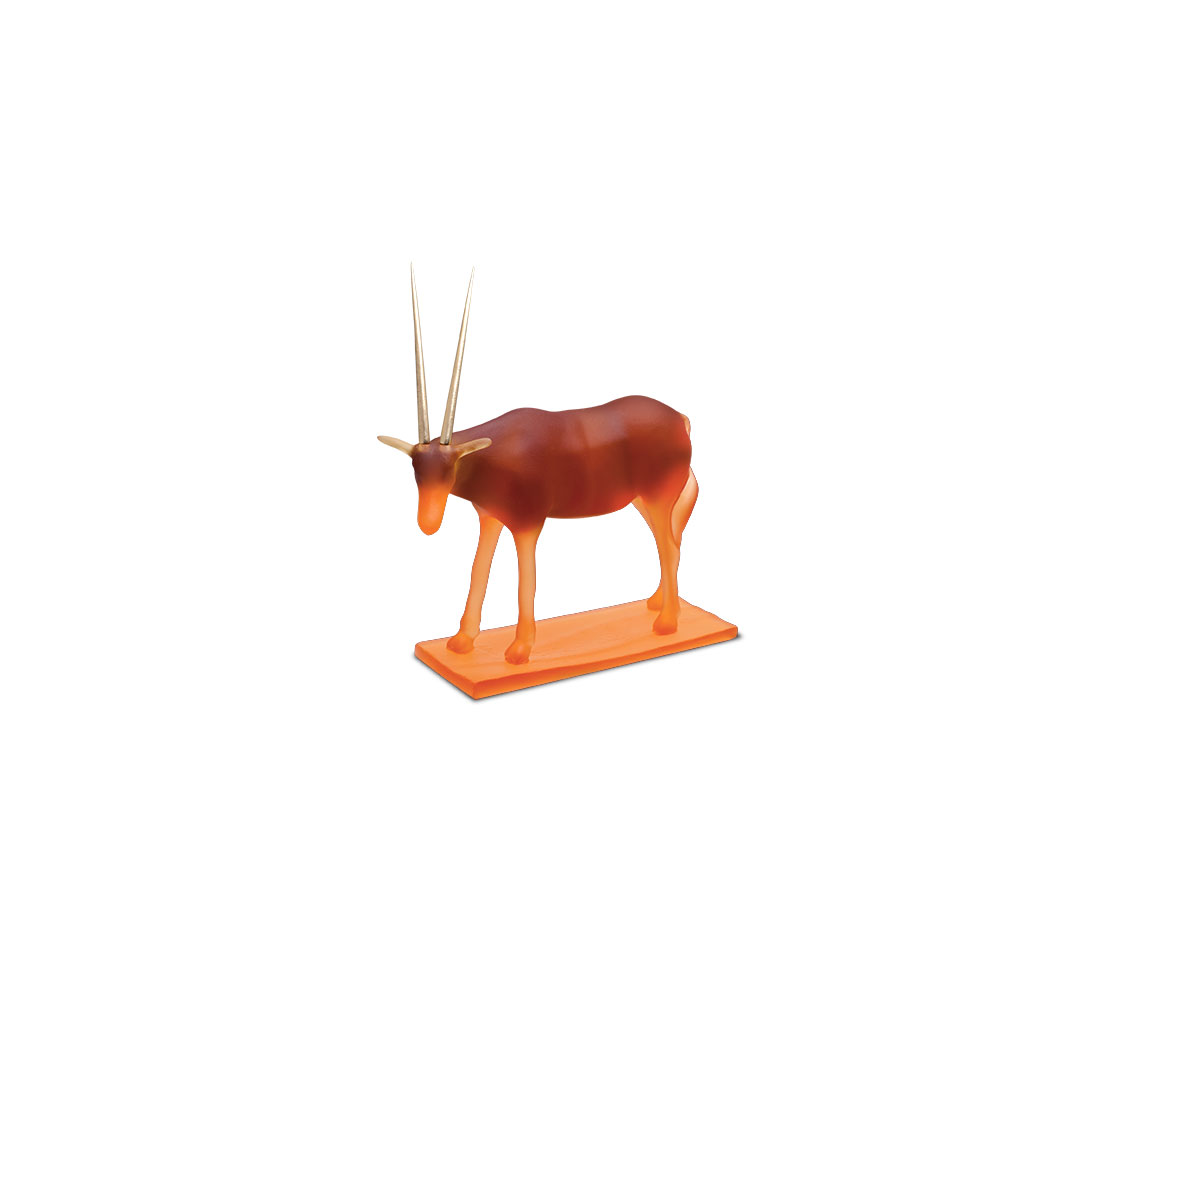 Daum Small Amber Oryx by Hicham Lahlou, Limited Edition Sculpture